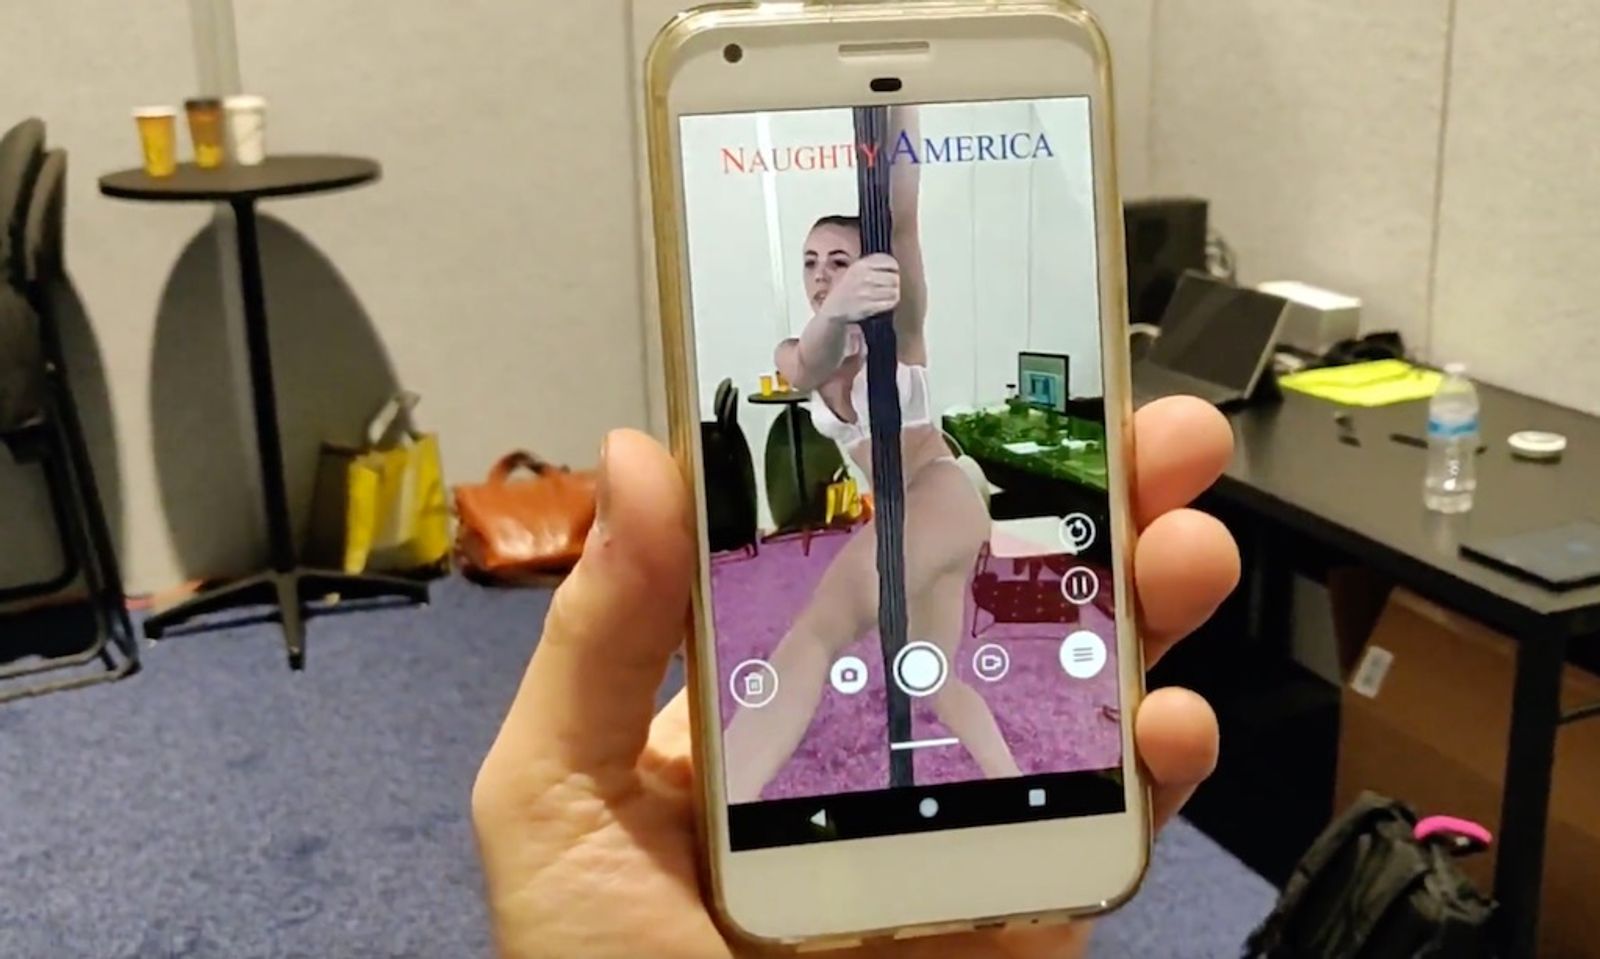 After VR Porn, Naughty America Now Offering ‘Augmented Reality’